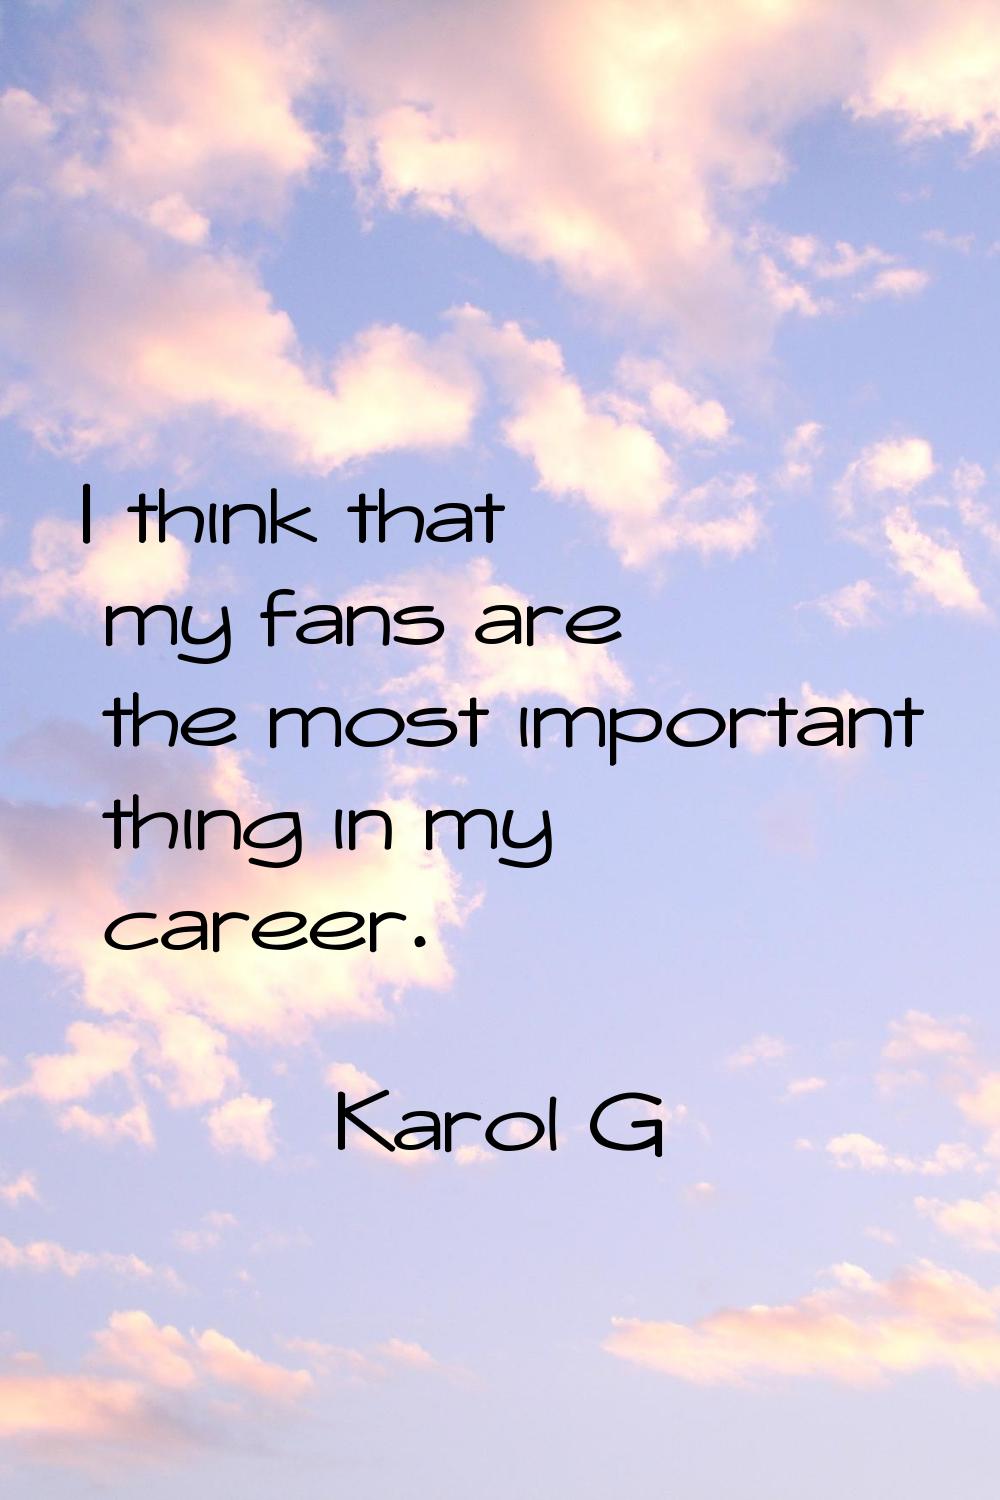 I think that my fans are the most important thing in my career.